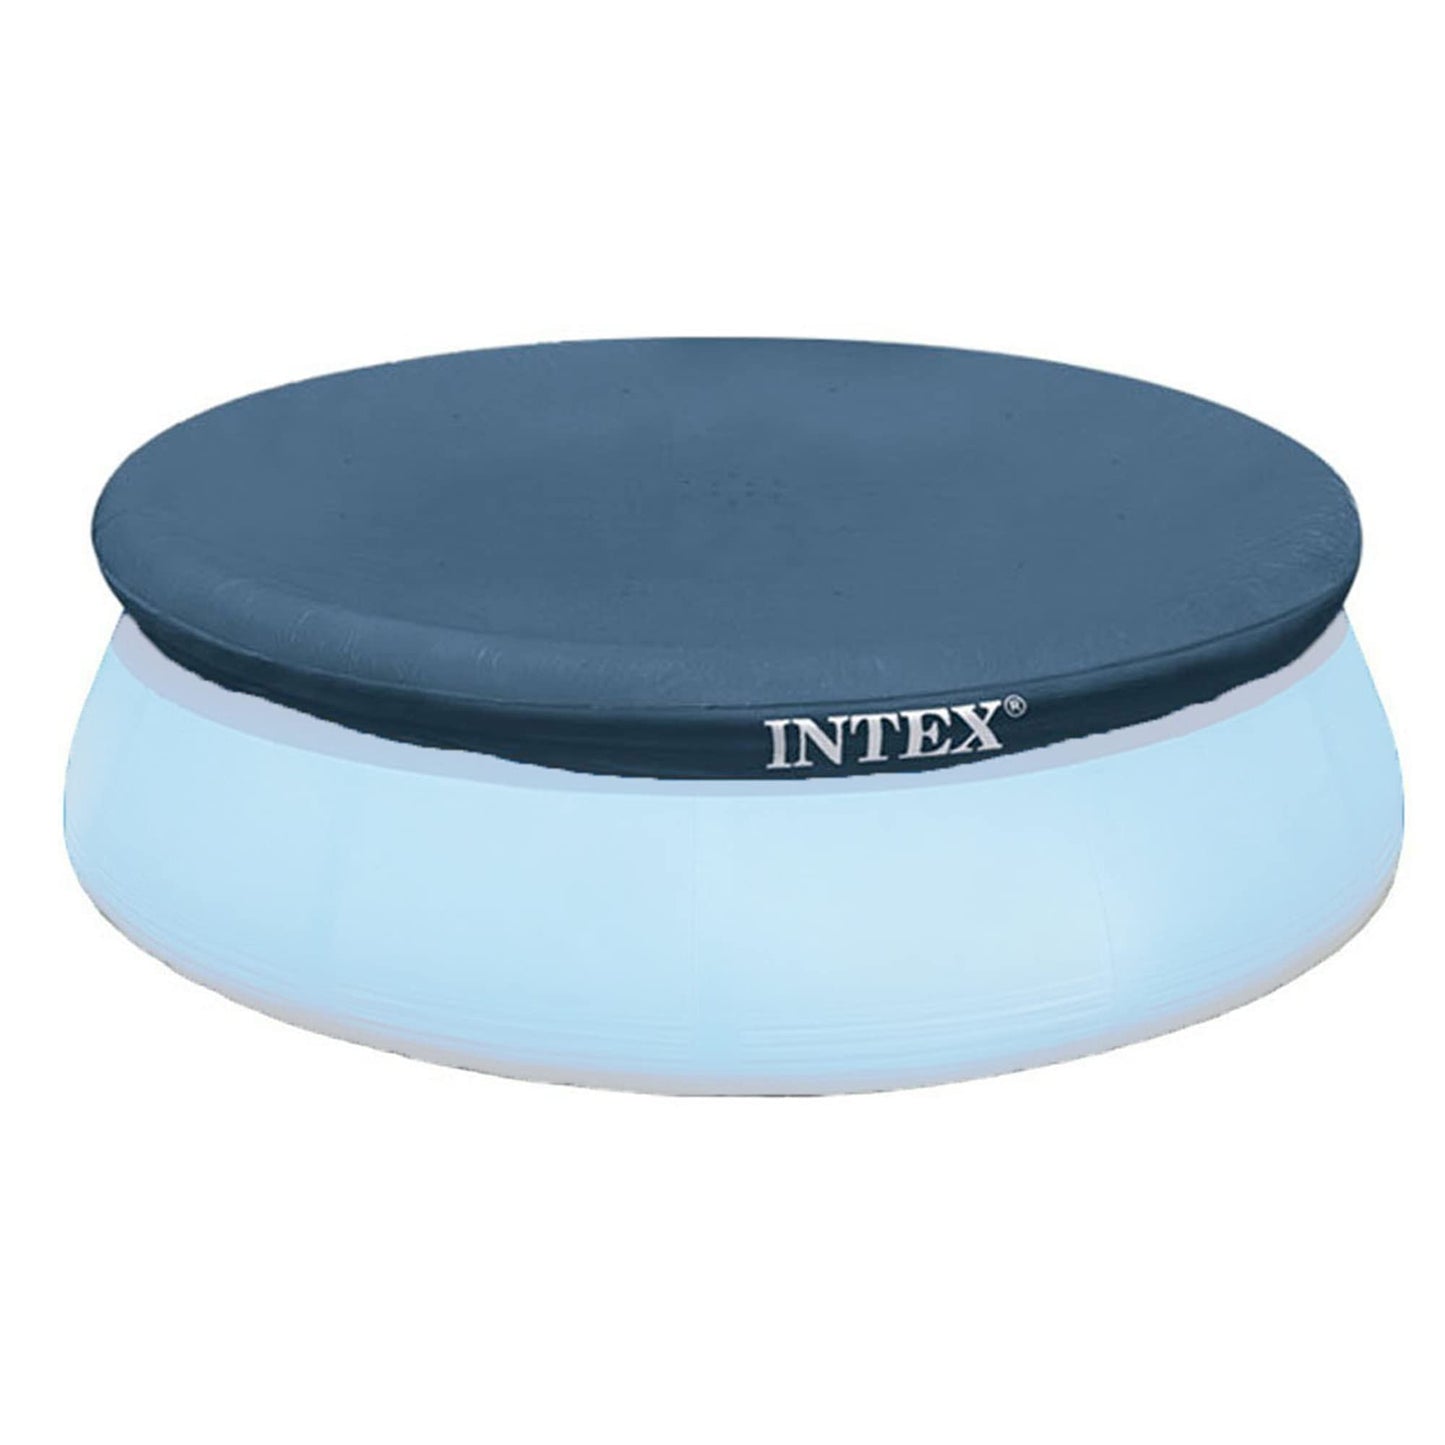 Intex Swim Center Round Inflatable Pool with Bench and Cover